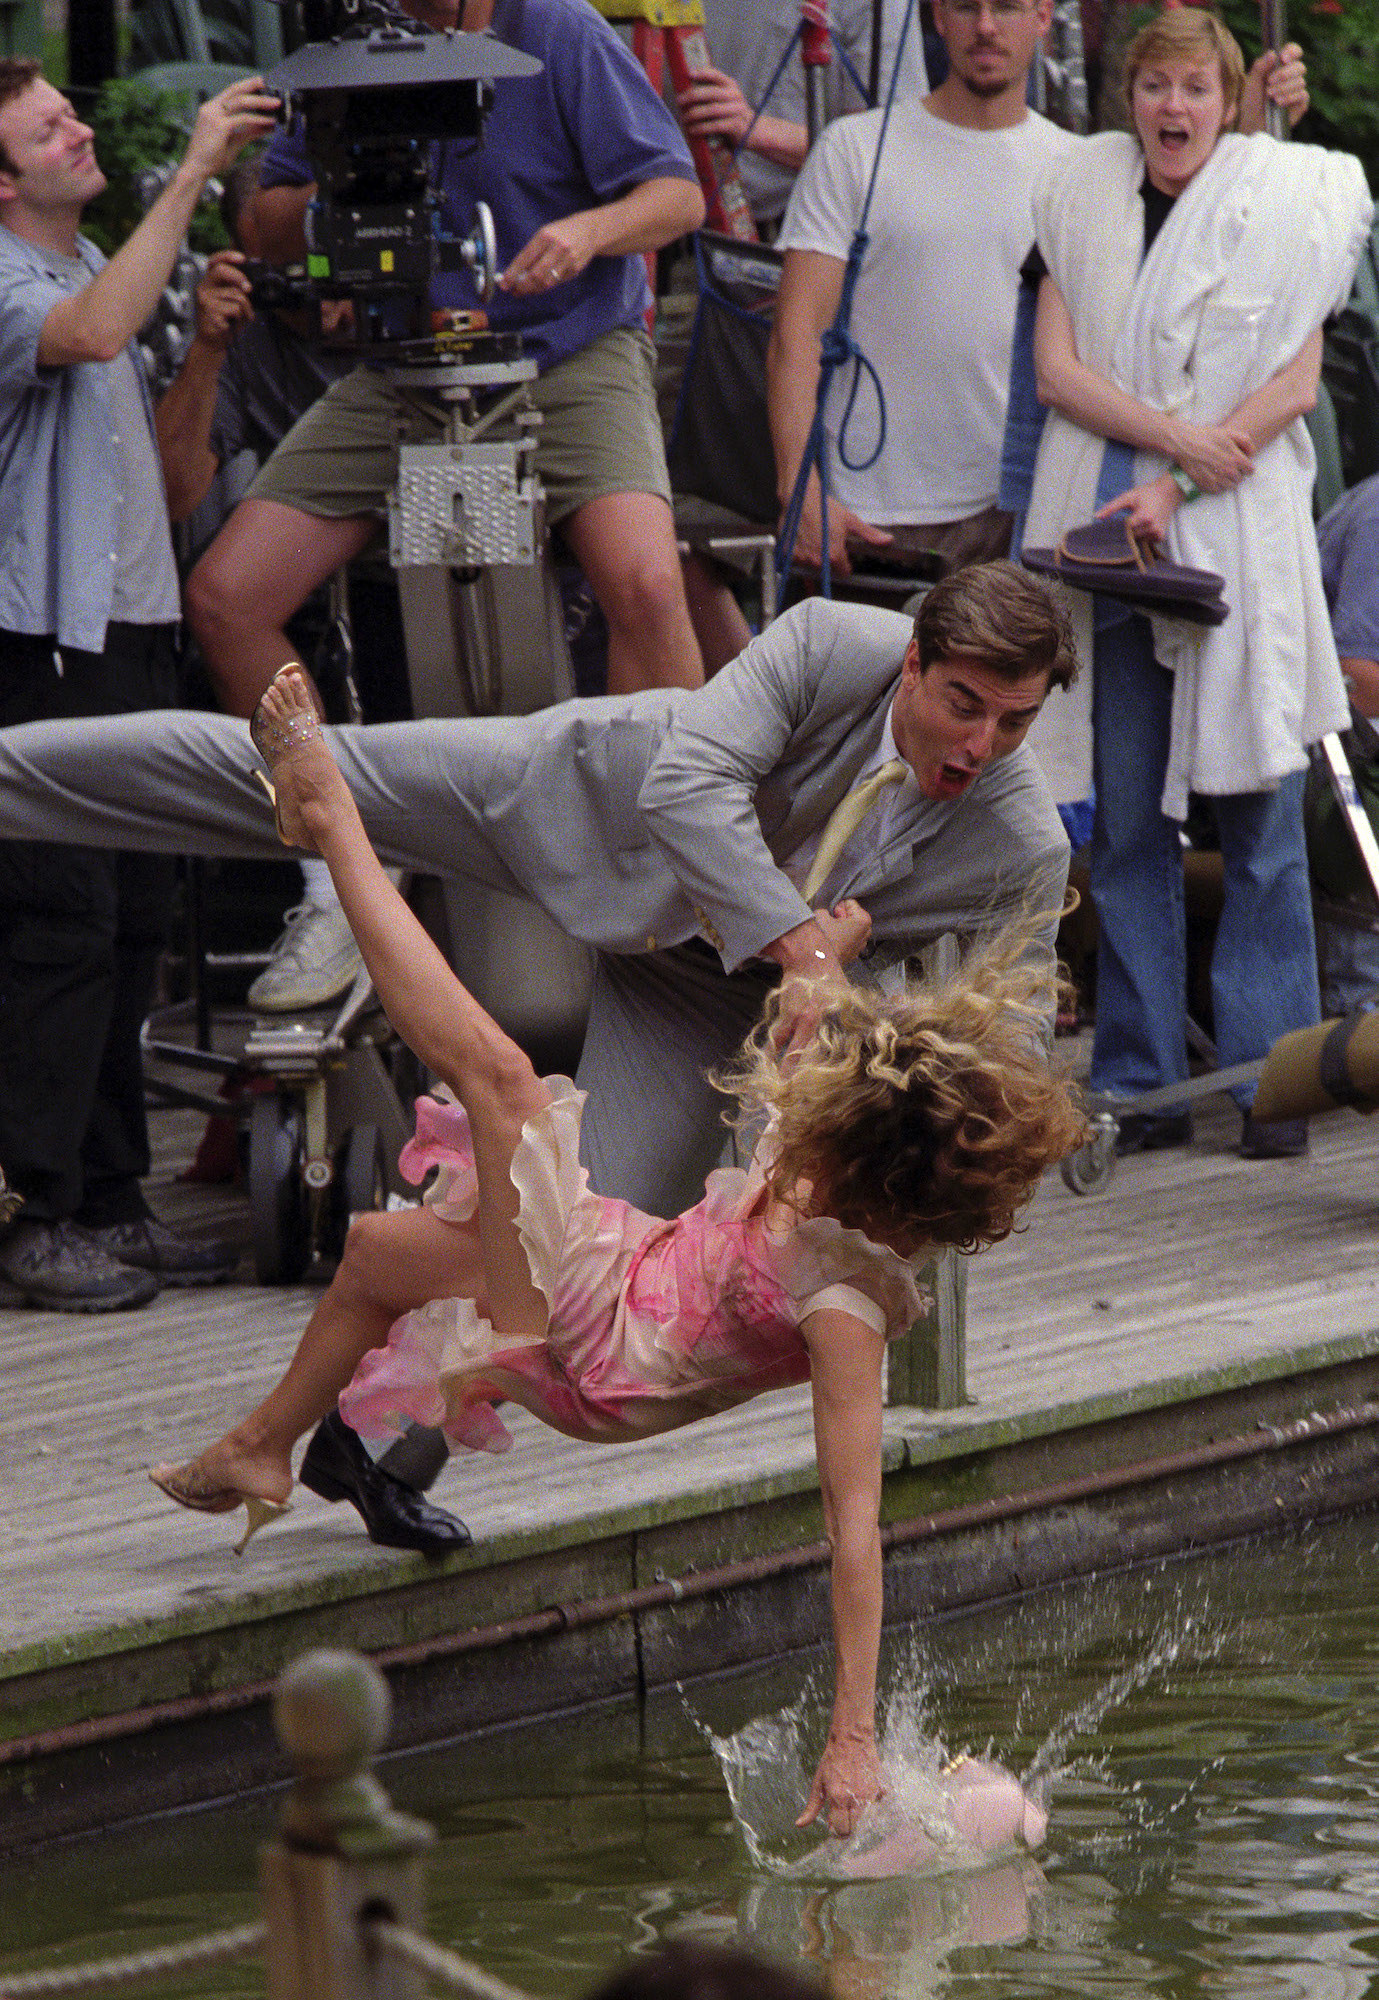 A behind-the-scenes shot of SATC filmmakers shooting Sarah Jessica Parker and Chris Noth falling into the lake at Central Park